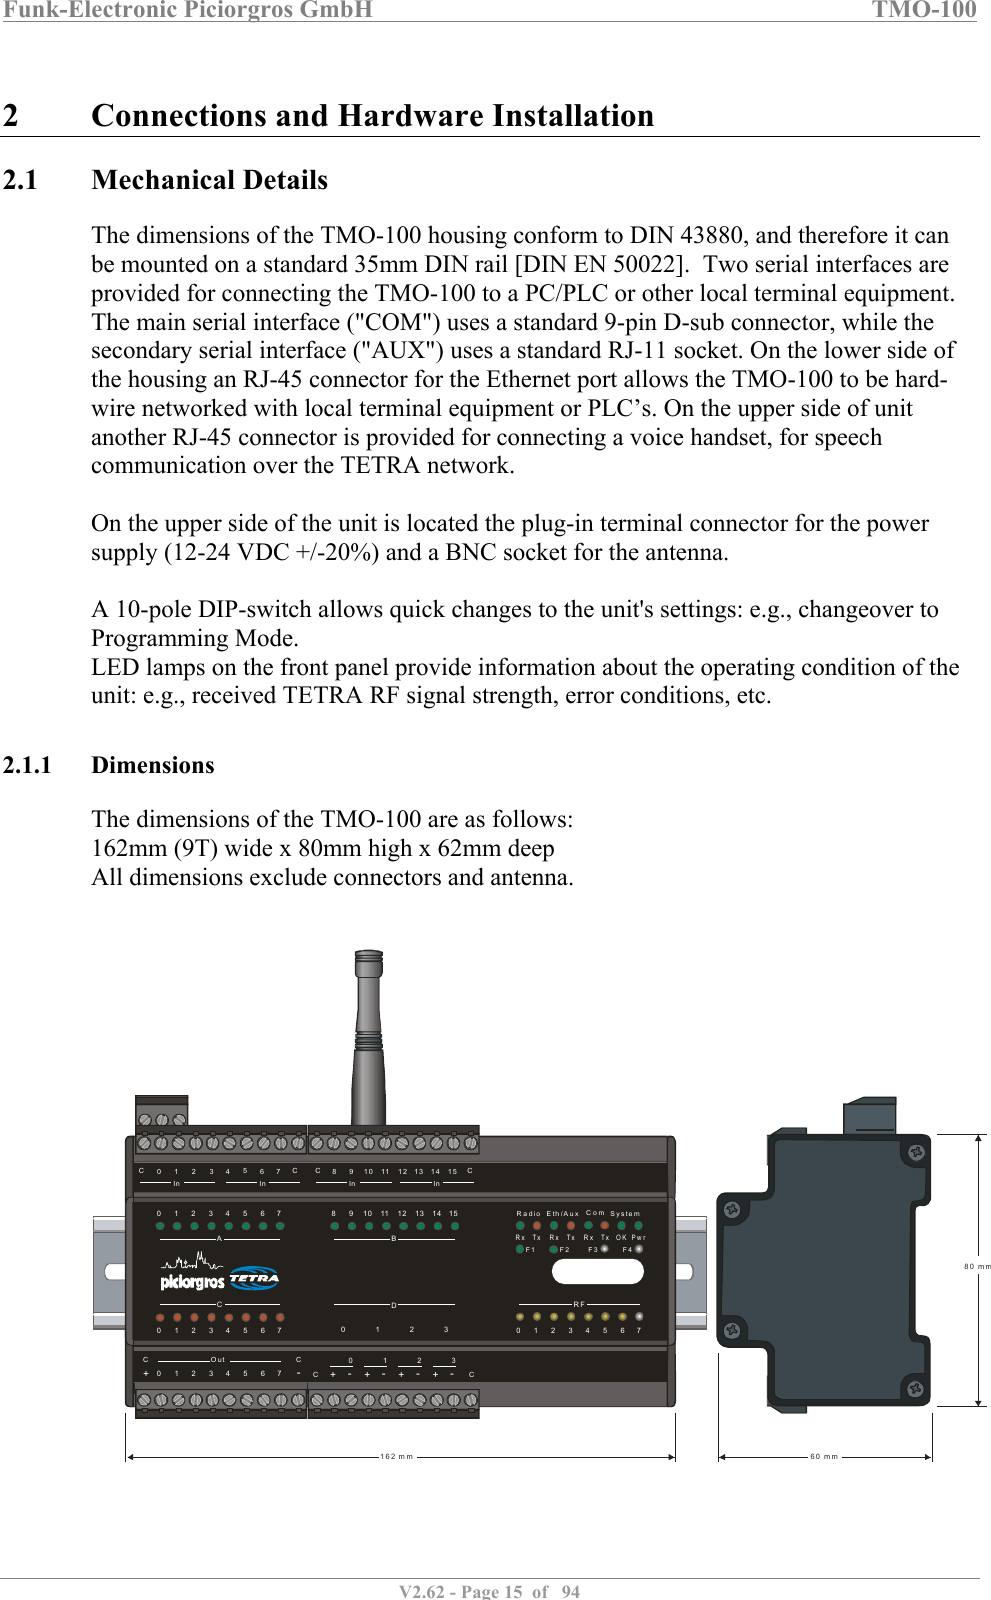 Funk-Electronic Piciorgros GmbH   TMO-100   V2.62 - Page 15  of   94   2 Connections and Hardware Installation 2.1 Mechanical Details The dimensions of the TMO-100 housing conform to DIN 43880, and therefore it can be mounted on a standard 35mm DIN rail [DIN EN 50022].  Two serial interfaces are provided for connecting the TMO-100 to a PC/PLC or other local terminal equipment. The main serial interface (&quot;COM&quot;) uses a standard 9-pin D-sub connector, while the secondary serial interface (&quot;AUX&quot;) uses a standard RJ-11 socket. On the lower side of the housing an RJ-45 connector for the Ethernet port allows the TMO-100 to be hard-wire networked with local terminal equipment or PLC’s. On the upper side of unit another RJ-45 connector is provided for connecting a voice handset, for speech communication over the TETRA network.   On the upper side of the unit is located the plug-in terminal connector for the power supply (12-24 VDC +/-20%) and a BNC socket for the antenna.   A 10-pole DIP-switch allows quick changes to the unit&apos;s settings: e.g., changeover to Programming Mode.  LED lamps on the front panel provide information about the operating condition of the unit: e.g., received TETRA RF signal strength, error conditions, etc.  2.1.1 Dimensions The dimensions of the TMO-100 are as follows: 162mm (9T) wide x 80mm high x 62mm deep All dimensions exclude connectors and antenna.      RFBDAC080 1 2 3001911210223113341244513556146671577CCOut CC++ + + +-- - - -0 1 2 30 1 2 3 4 5 6 7C C0 81 92 10311412513614In InIn In715C C80 mm60 mm162 m mRadioRx Rx RxTx Tx Tx OK PwrEth/Aux SystemComF1 F2 F4F3